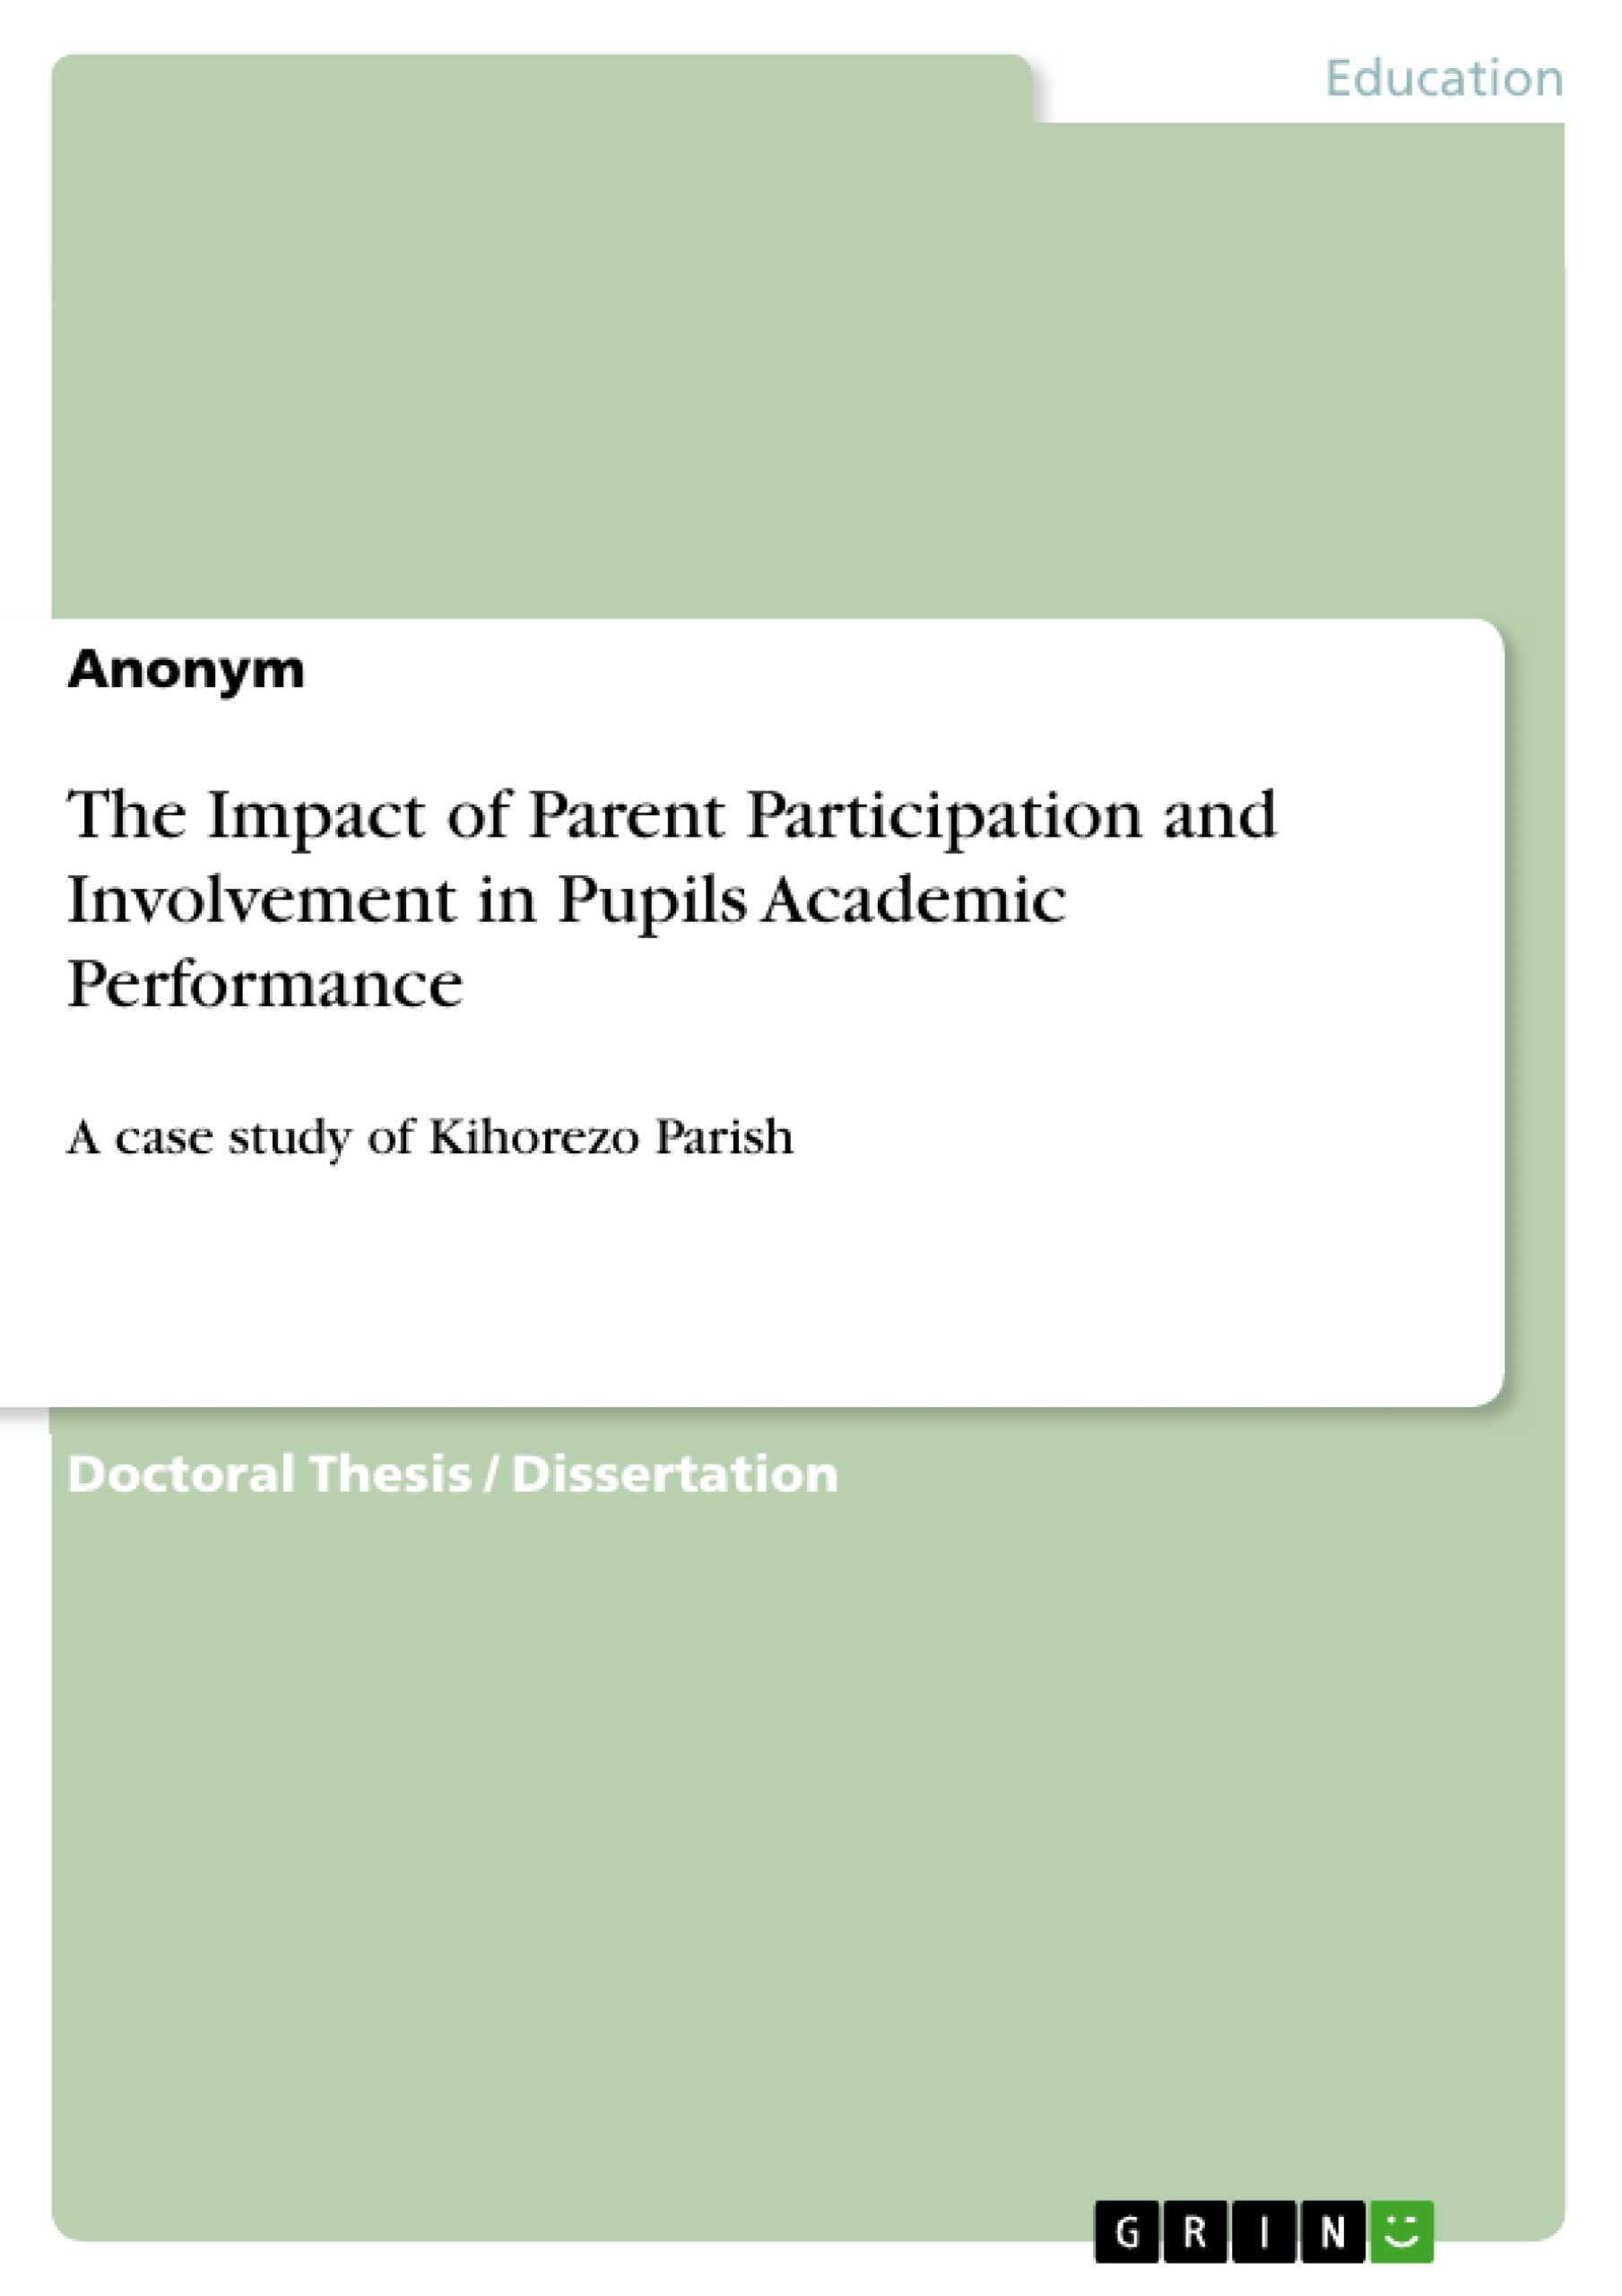 Title: The Impact of Parent Participation and Involvement in Pupils Academic Performance